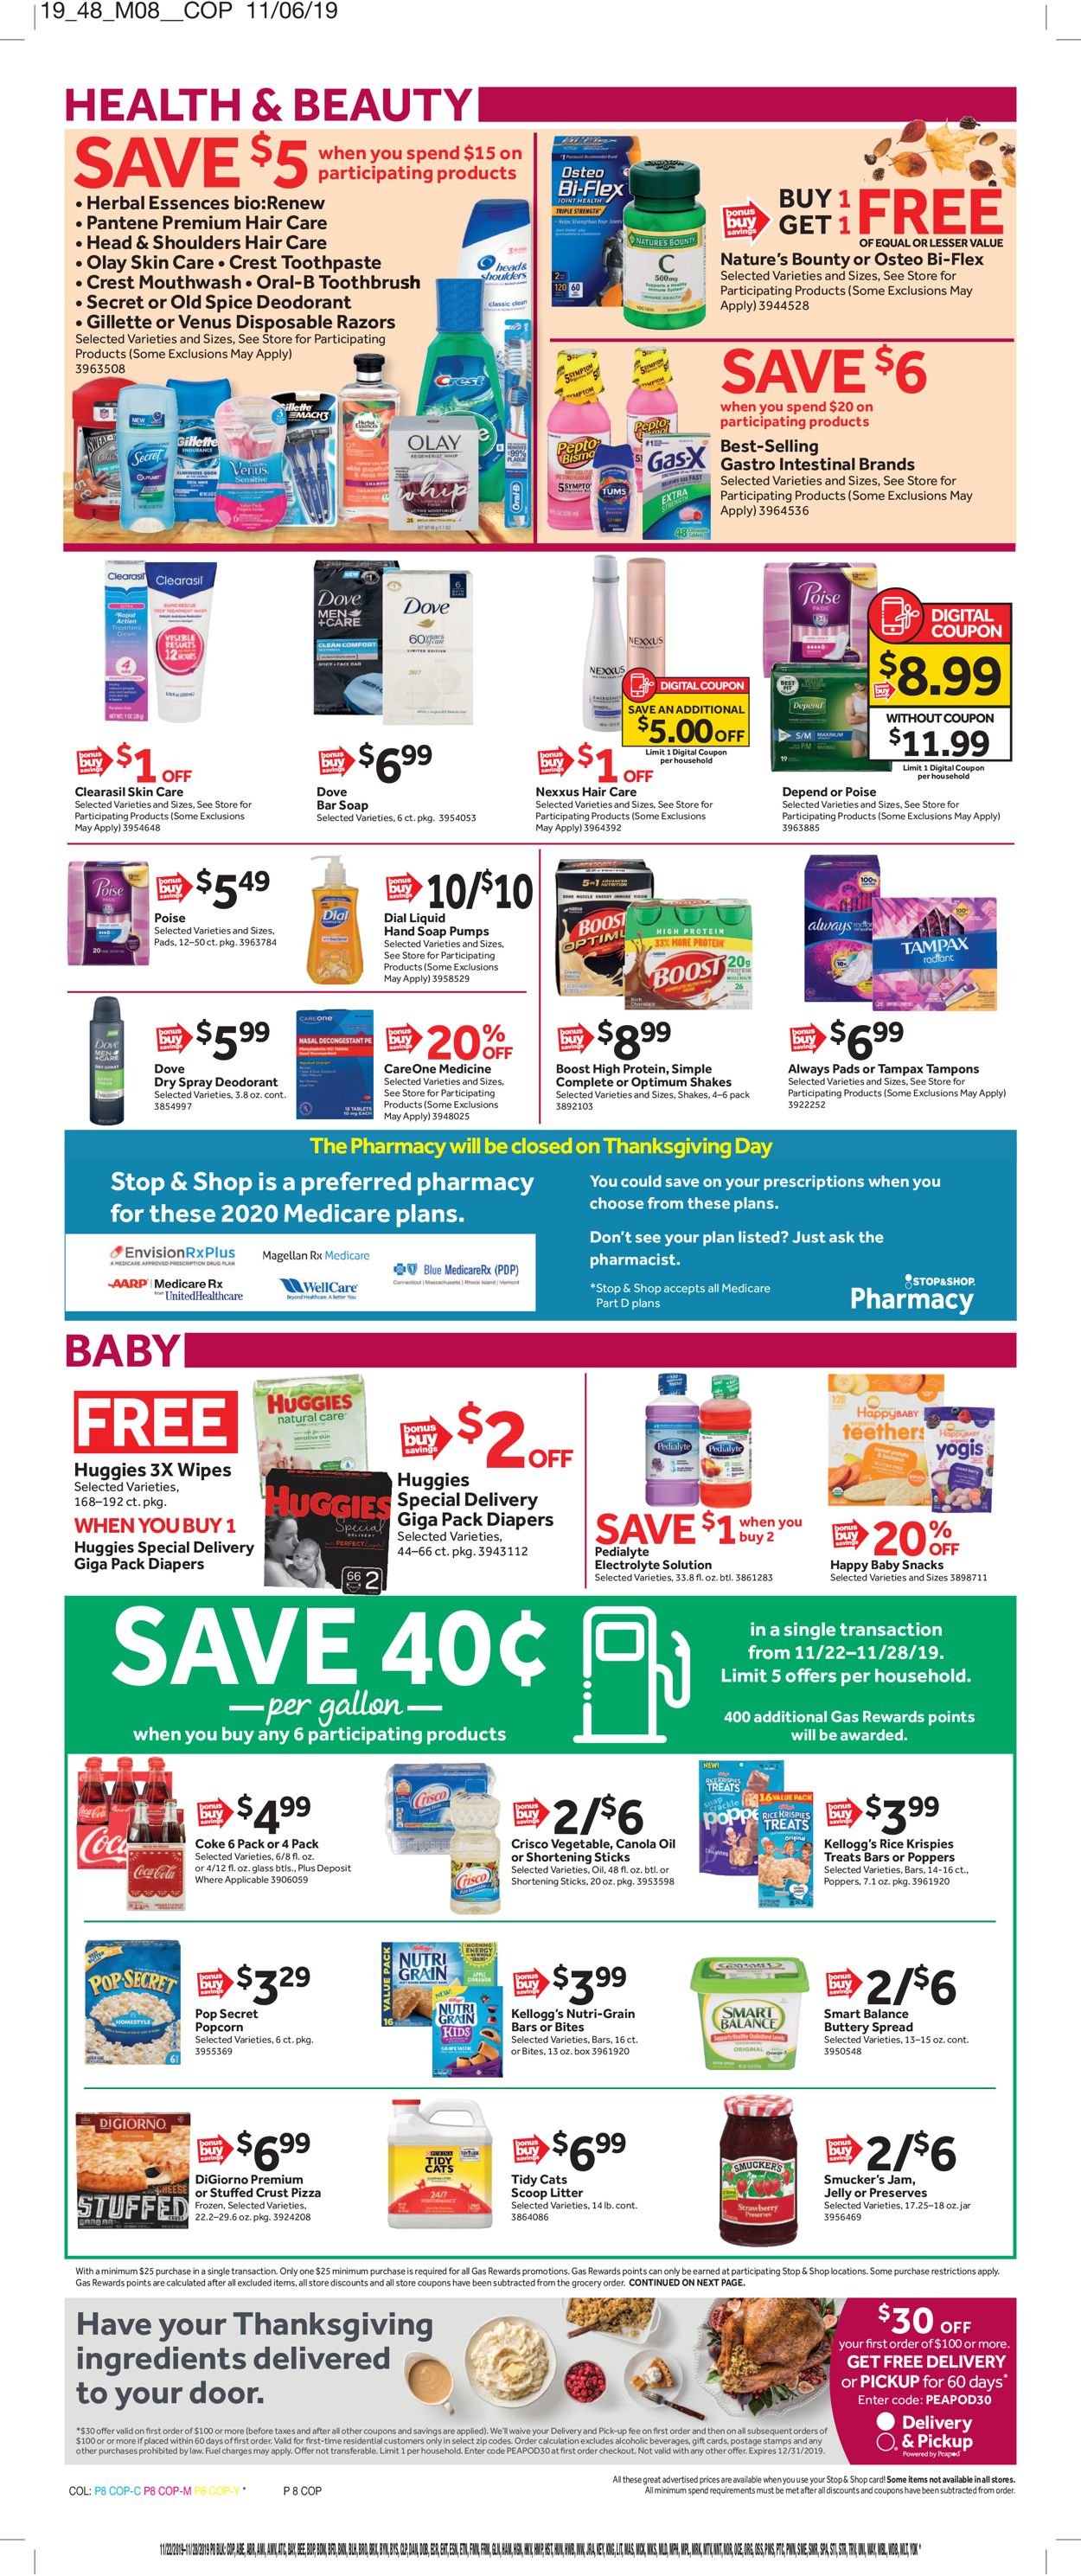 Catalogue Stop and Shop - Thanksgiving Ad 2019 from 11/22/2019